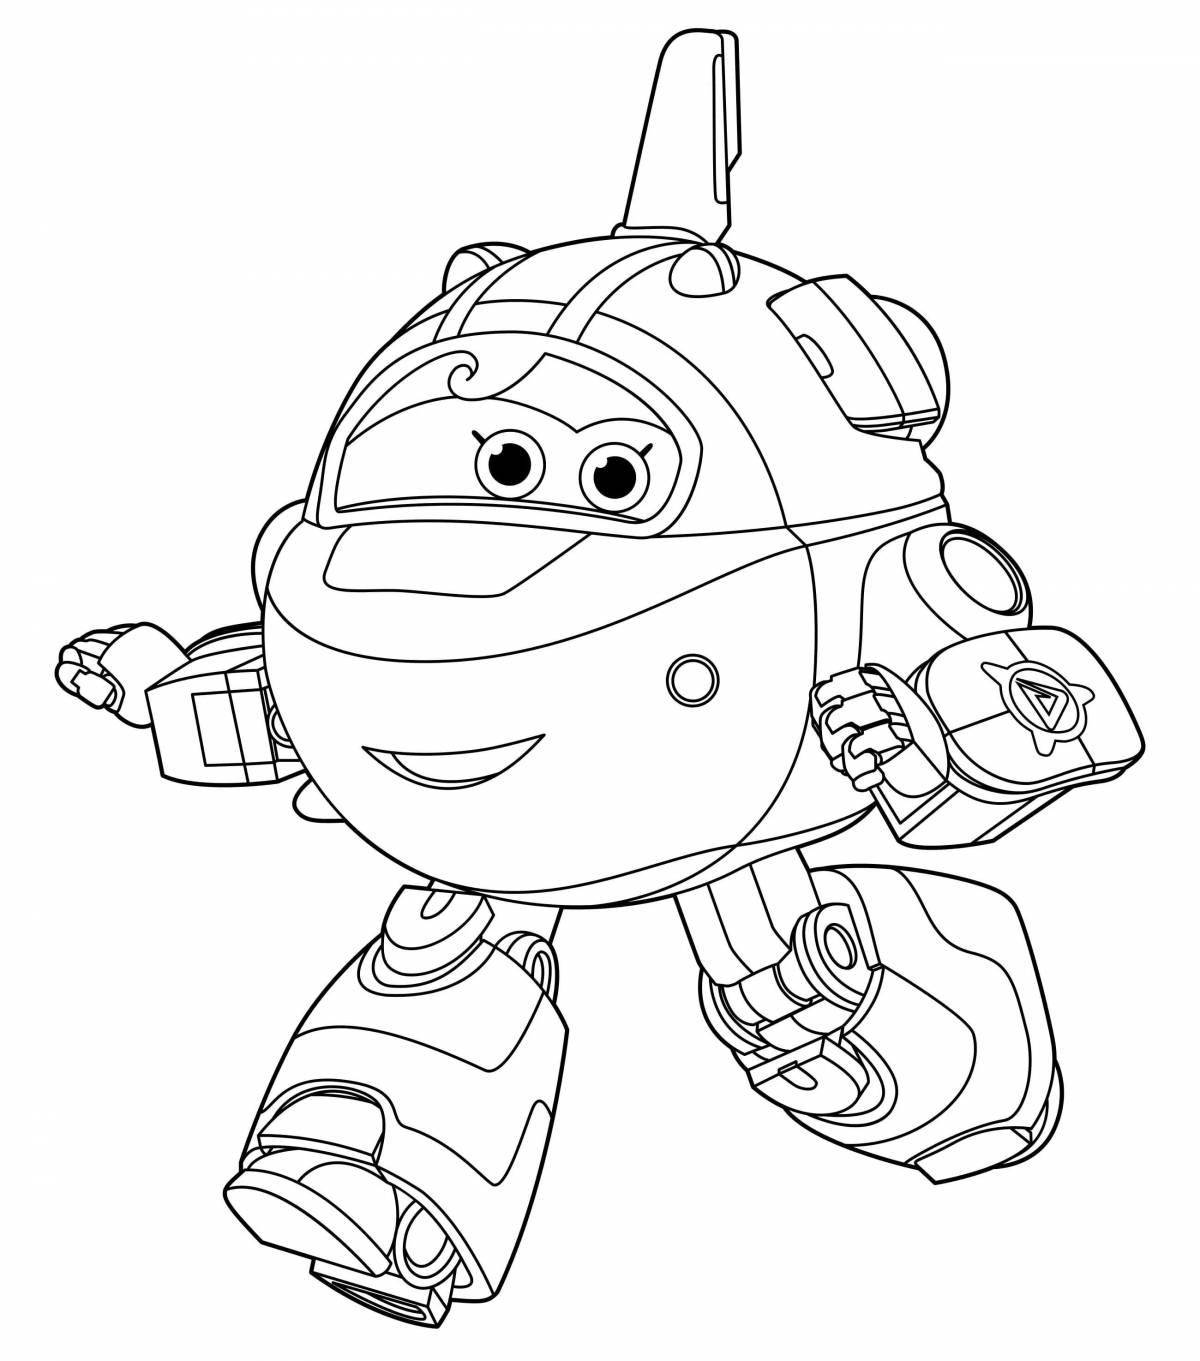 Donnie super wings amazing coloring book